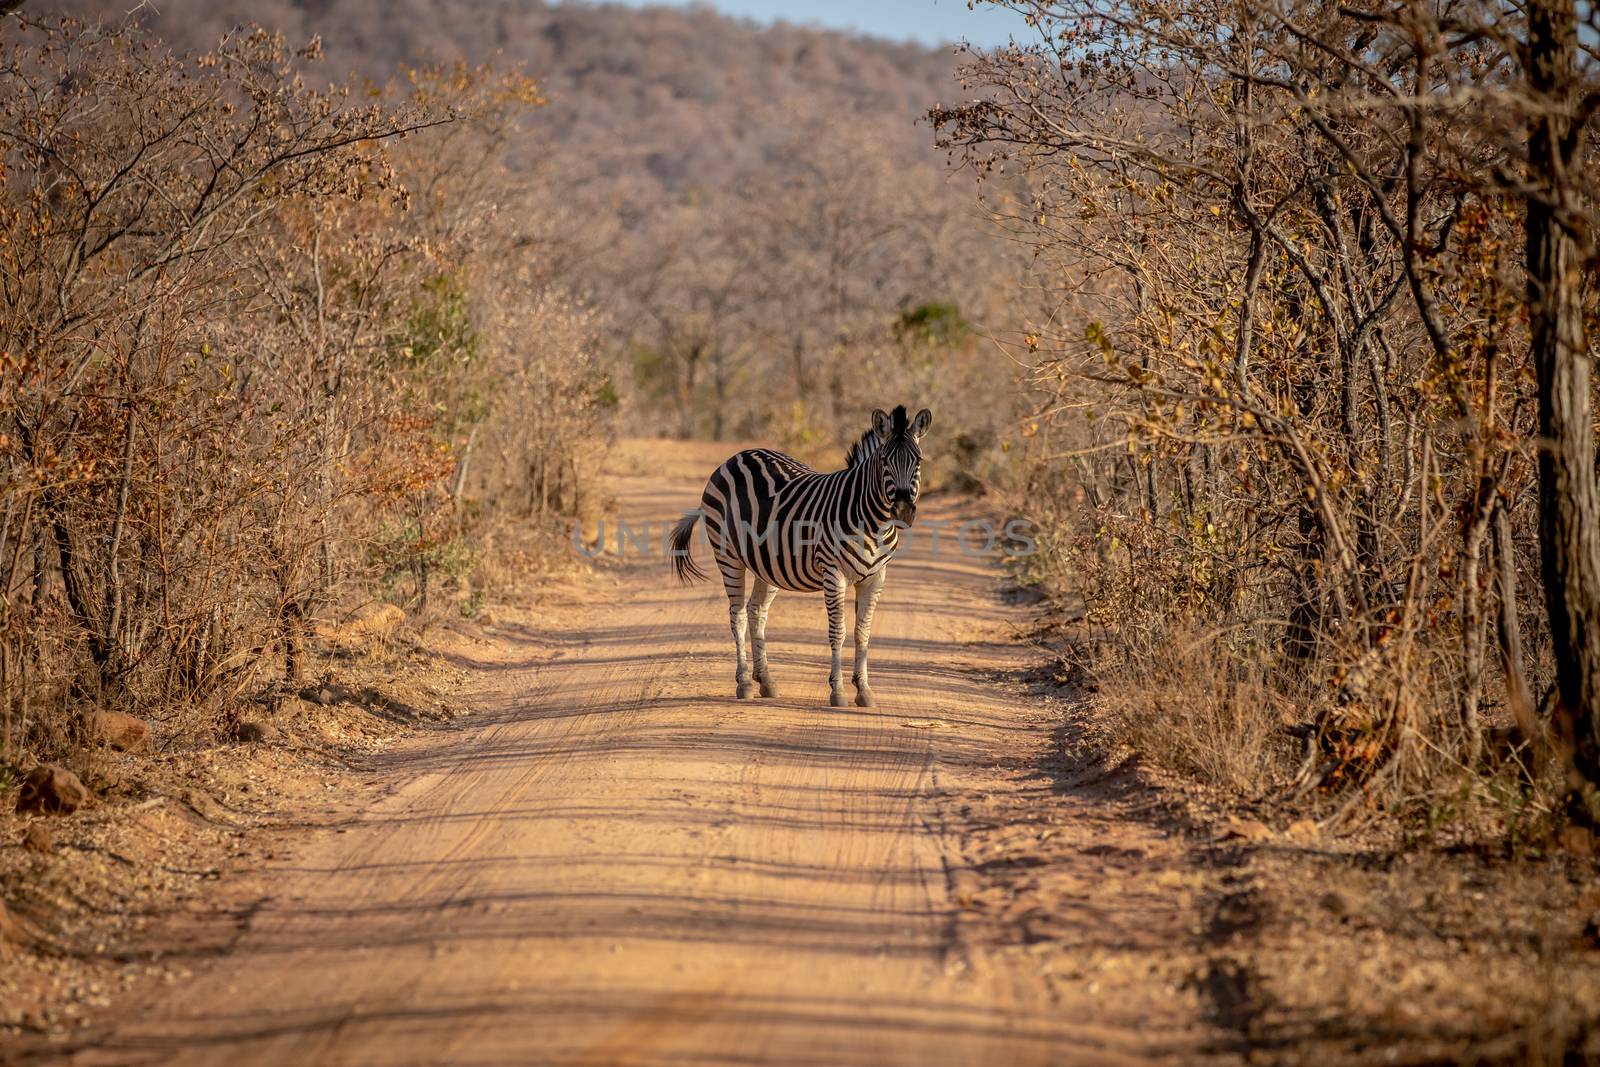 Zebra standing in the middle of a bush road in the Welgevonden game reserve, South Africa.